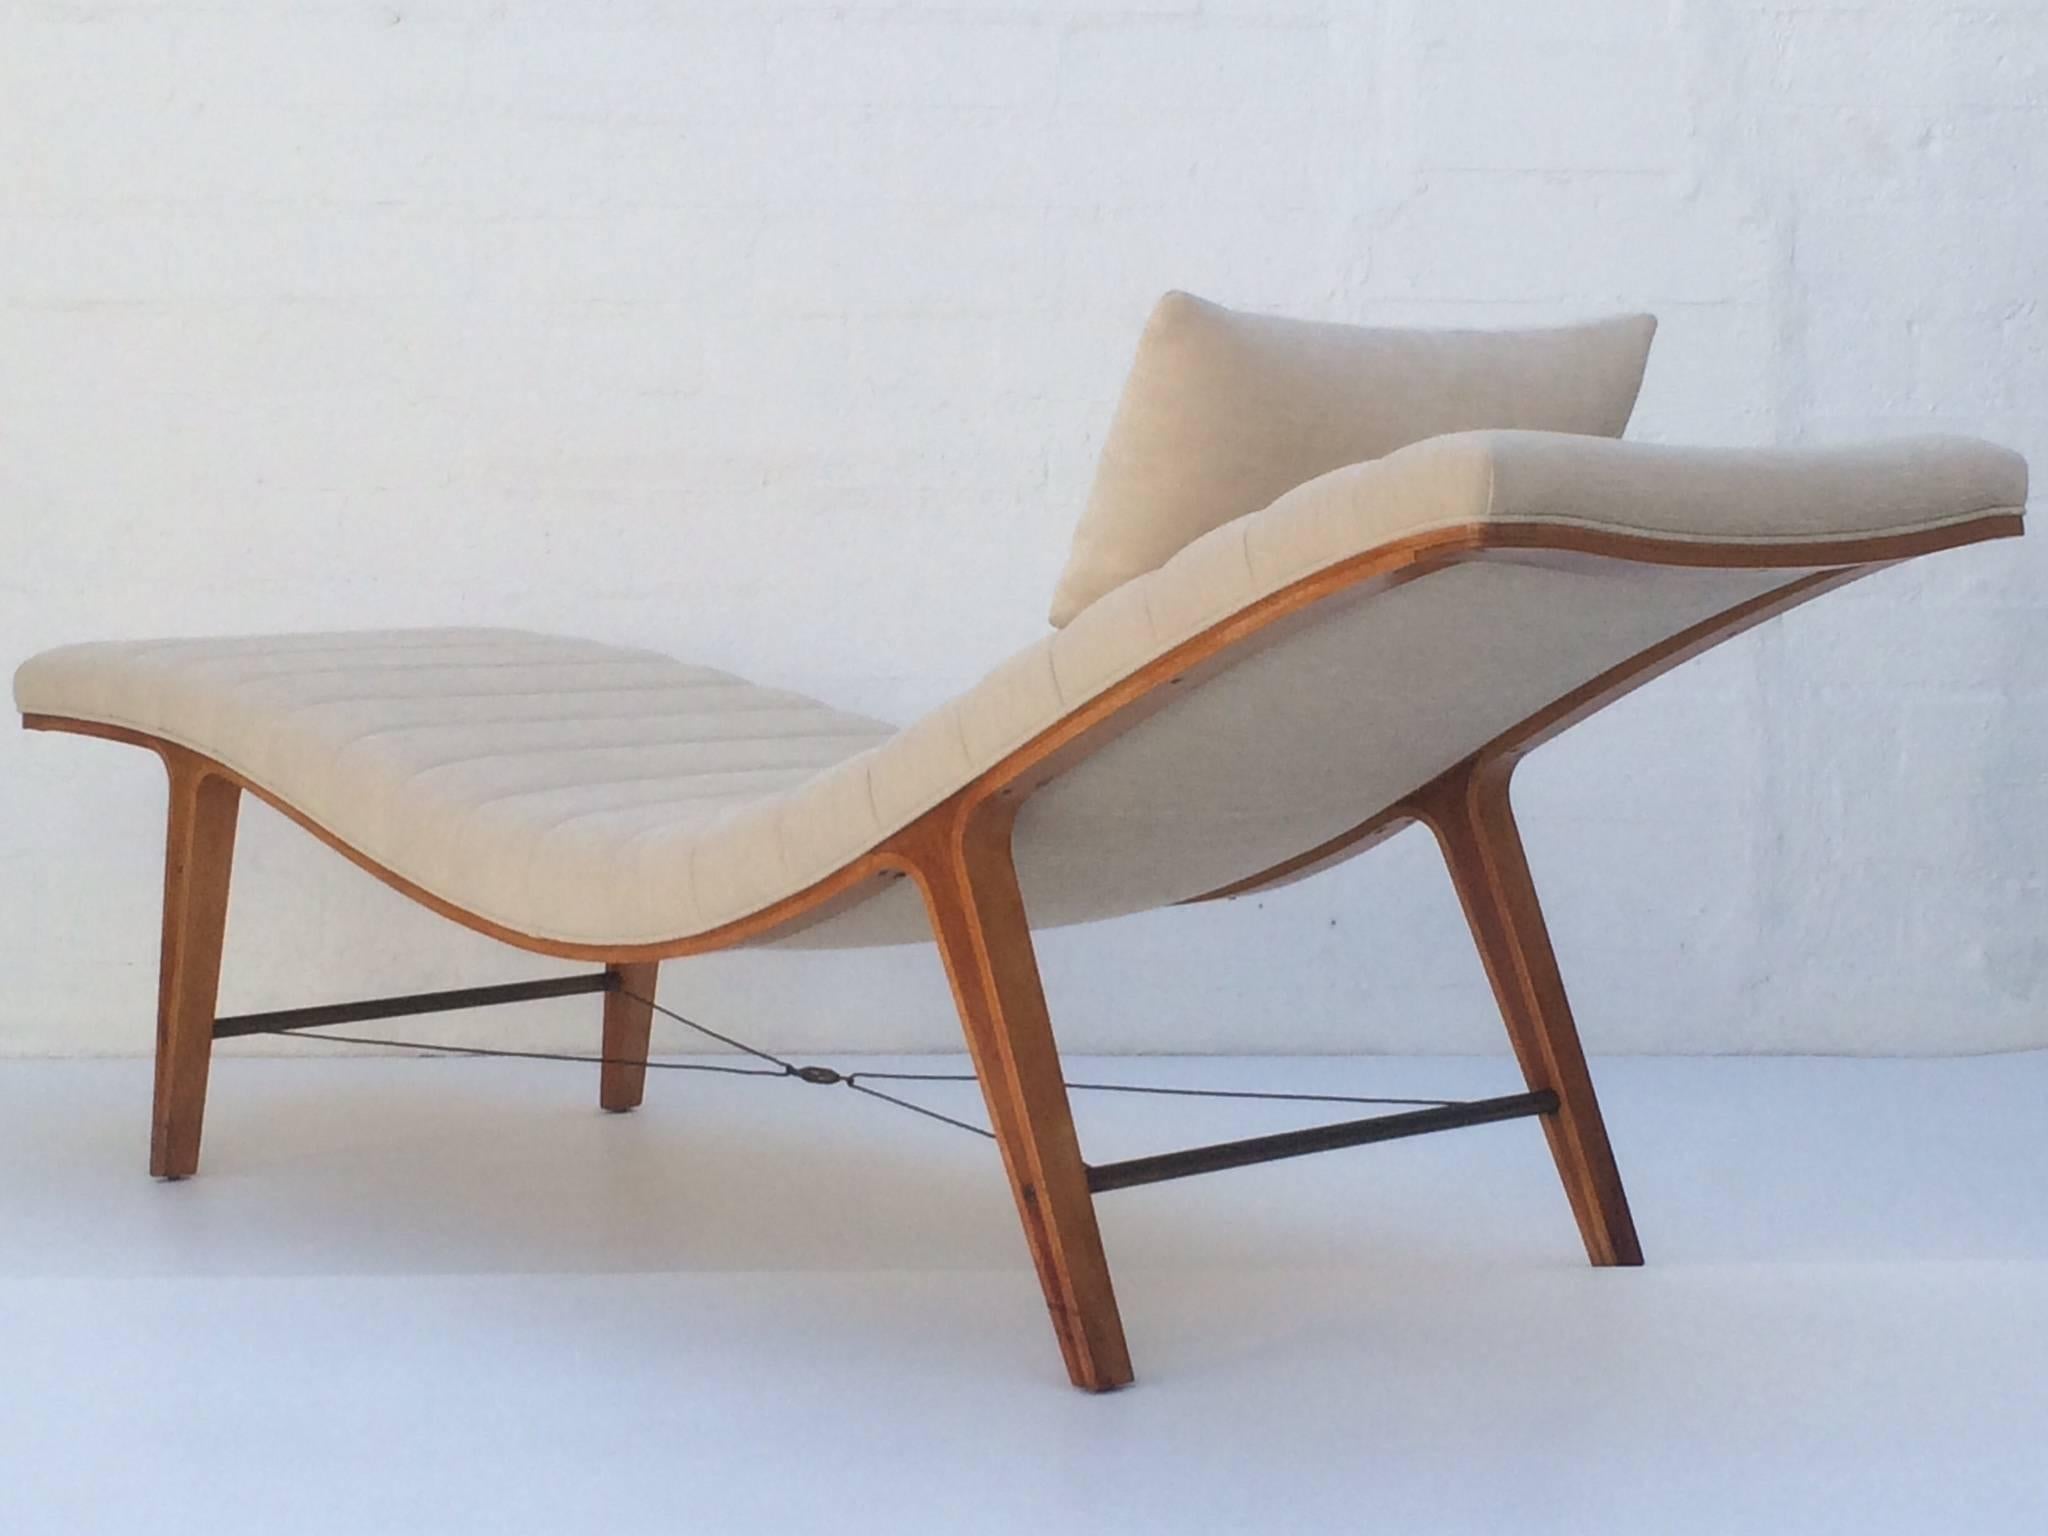 The Listen-to-Me Chasie, circa 1948 is Edward Wormley's most iconic design for Dunbar.
The curvilinear shape and channeled upholstered cushion is supported on a frame of laminated maple and cherry. 
The guide wires add a sculptural flourish.